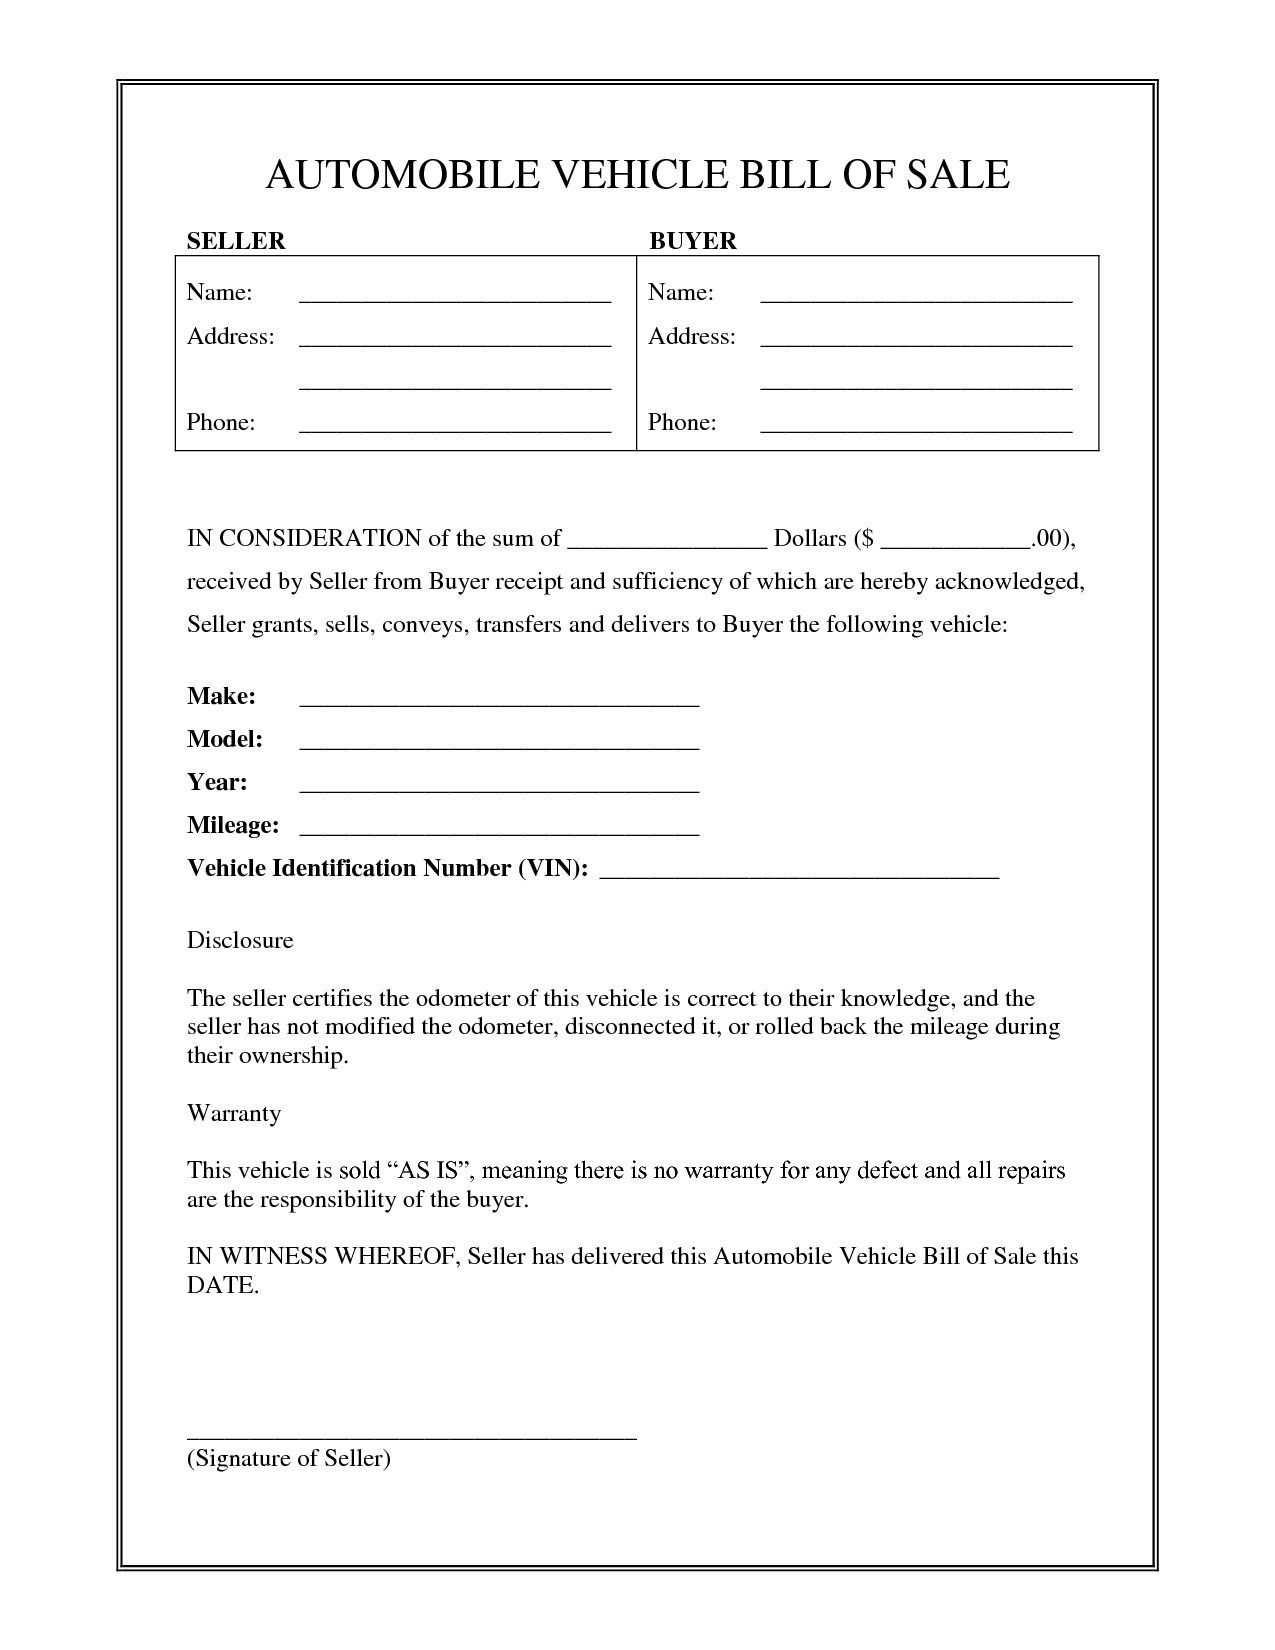 free template of bill of sale for car in state of florida